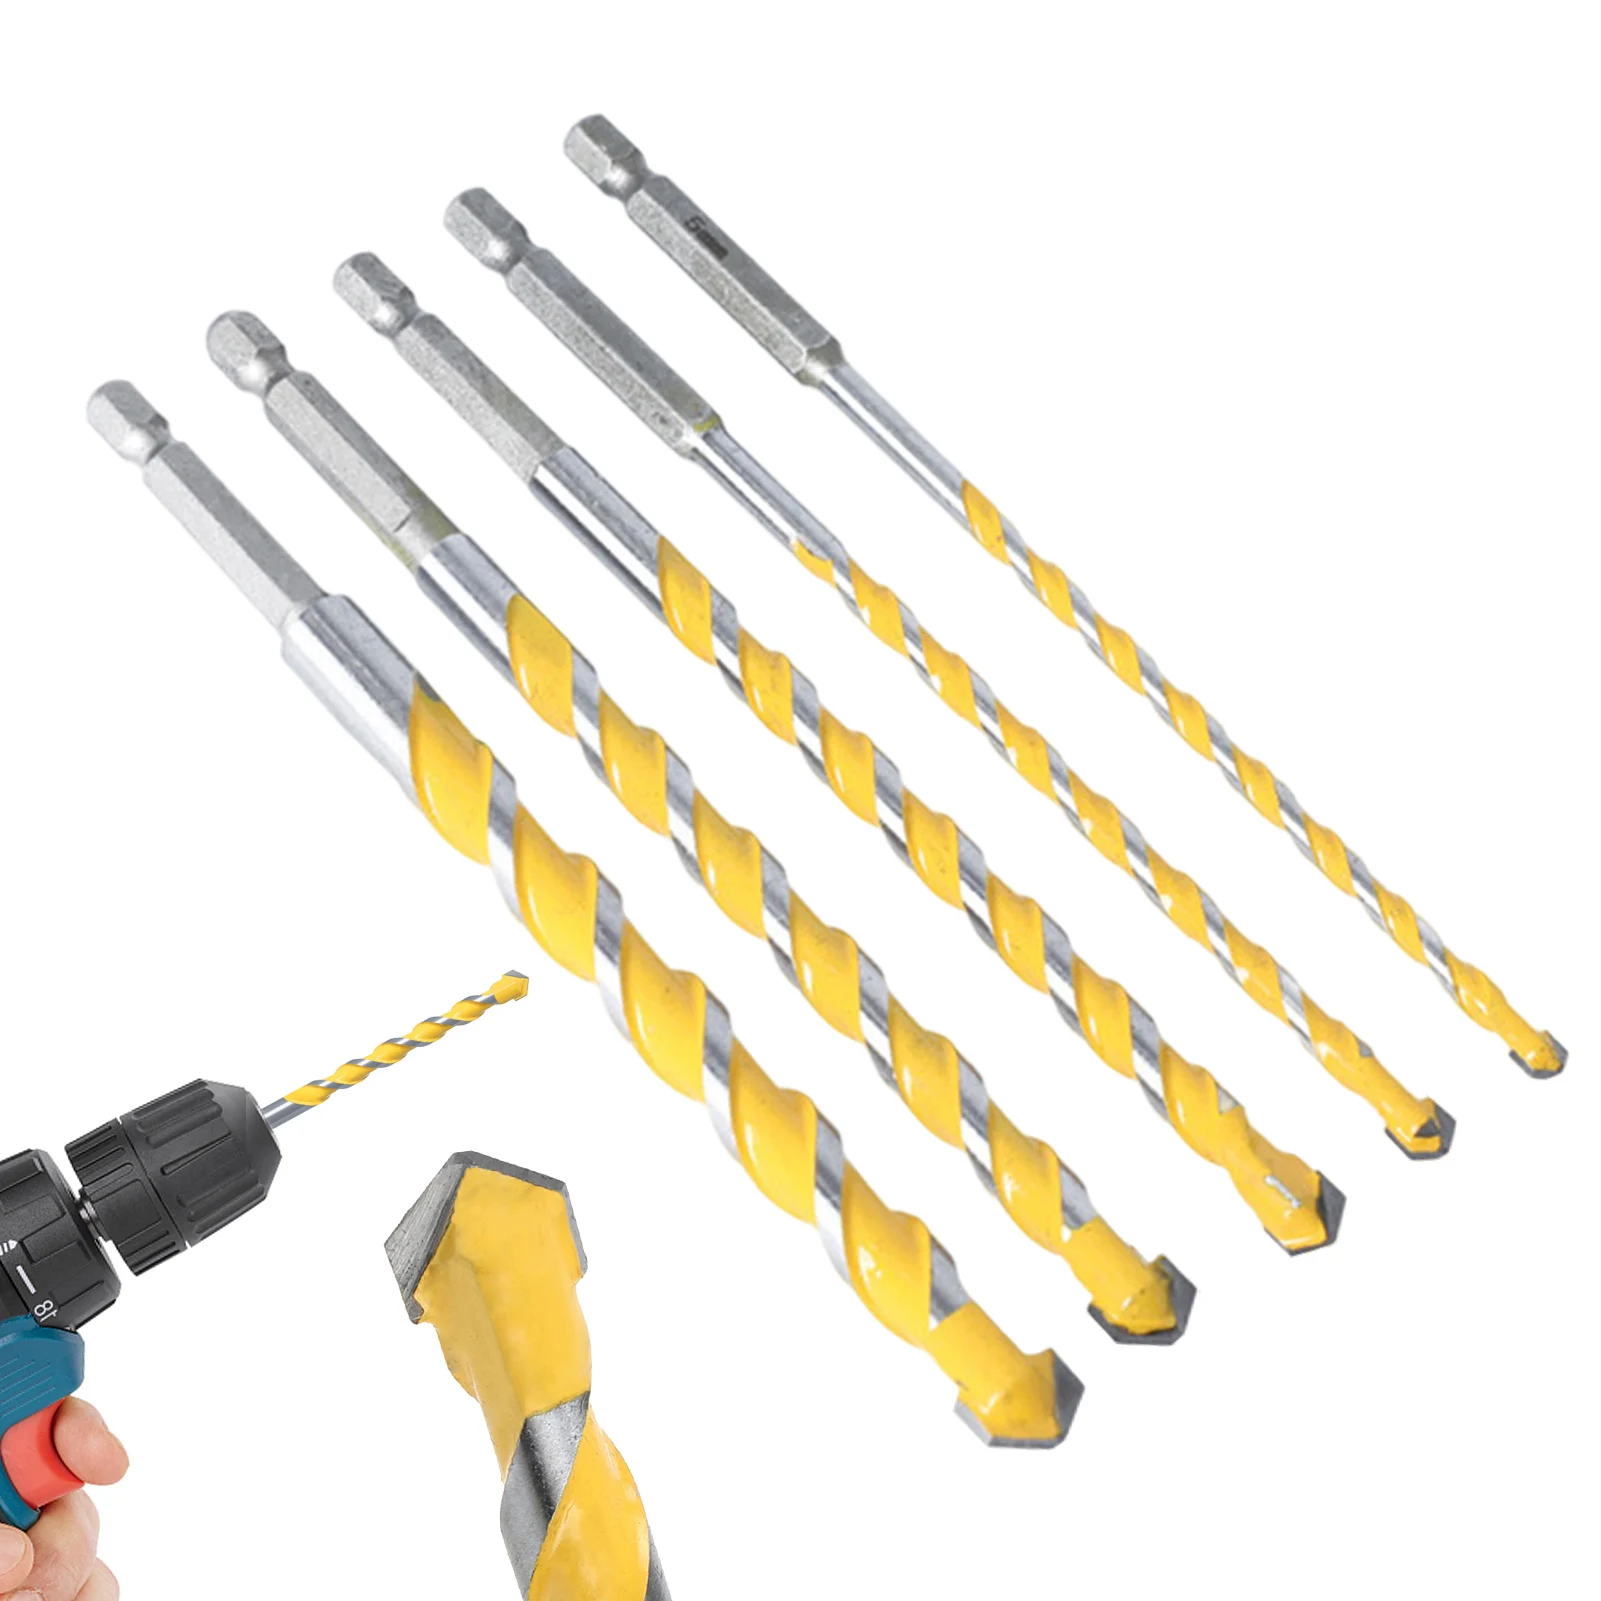 

Hex Shank Home Professional Tile Masonry Tools Concrete Drill Bit Set Plastic Cement Glass Brick Industrial Strength Carbide Tip